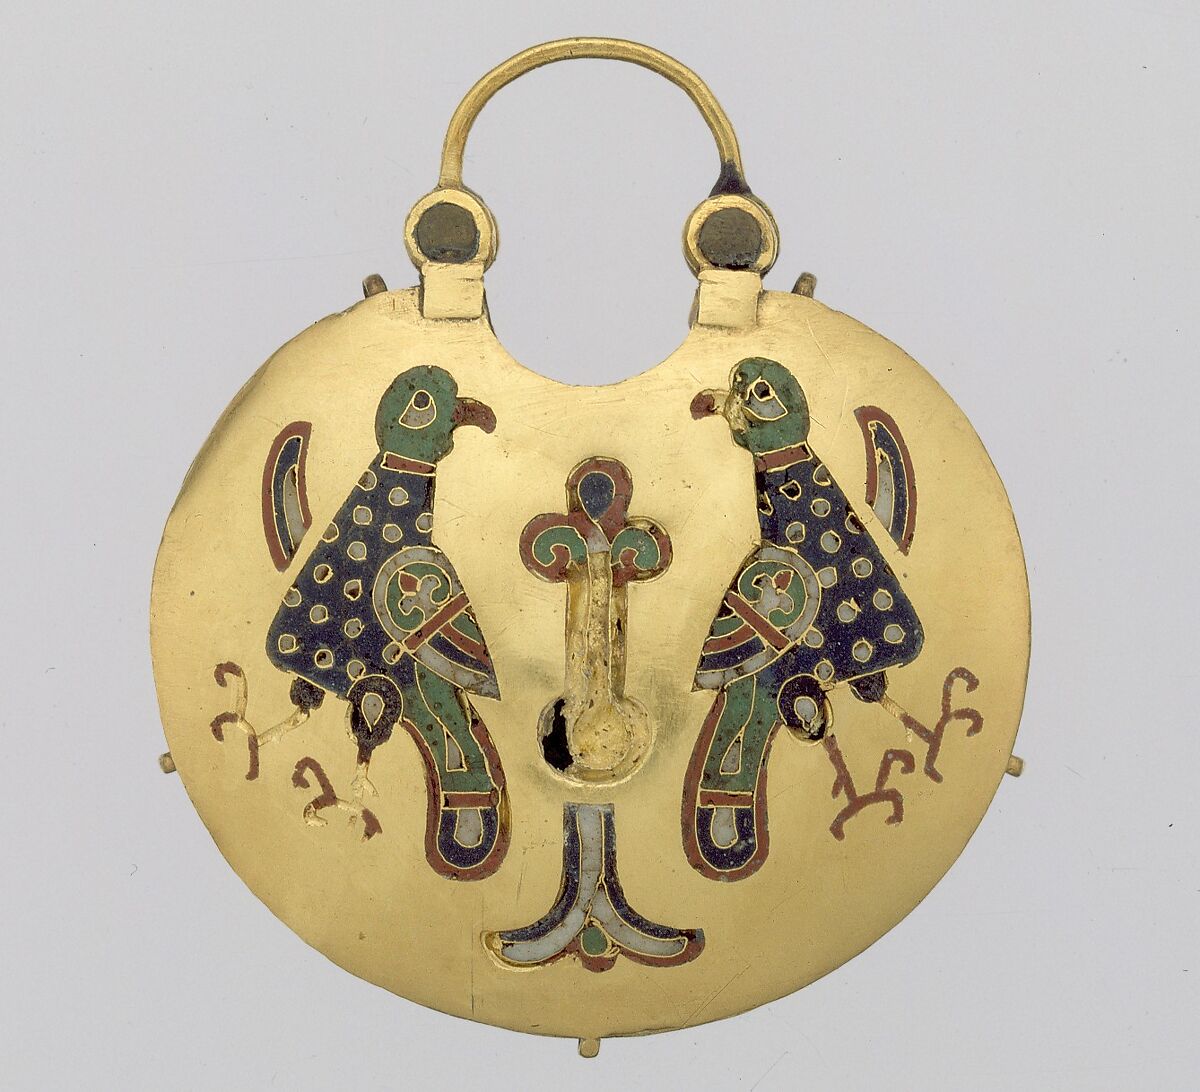 Temple Pendant with Two Birds Flanking a Tree of Life (front) and Geometric Lead Motifs (back), Gold, silver, and enamel worked in cloisonné, Kyivan Rus’ 